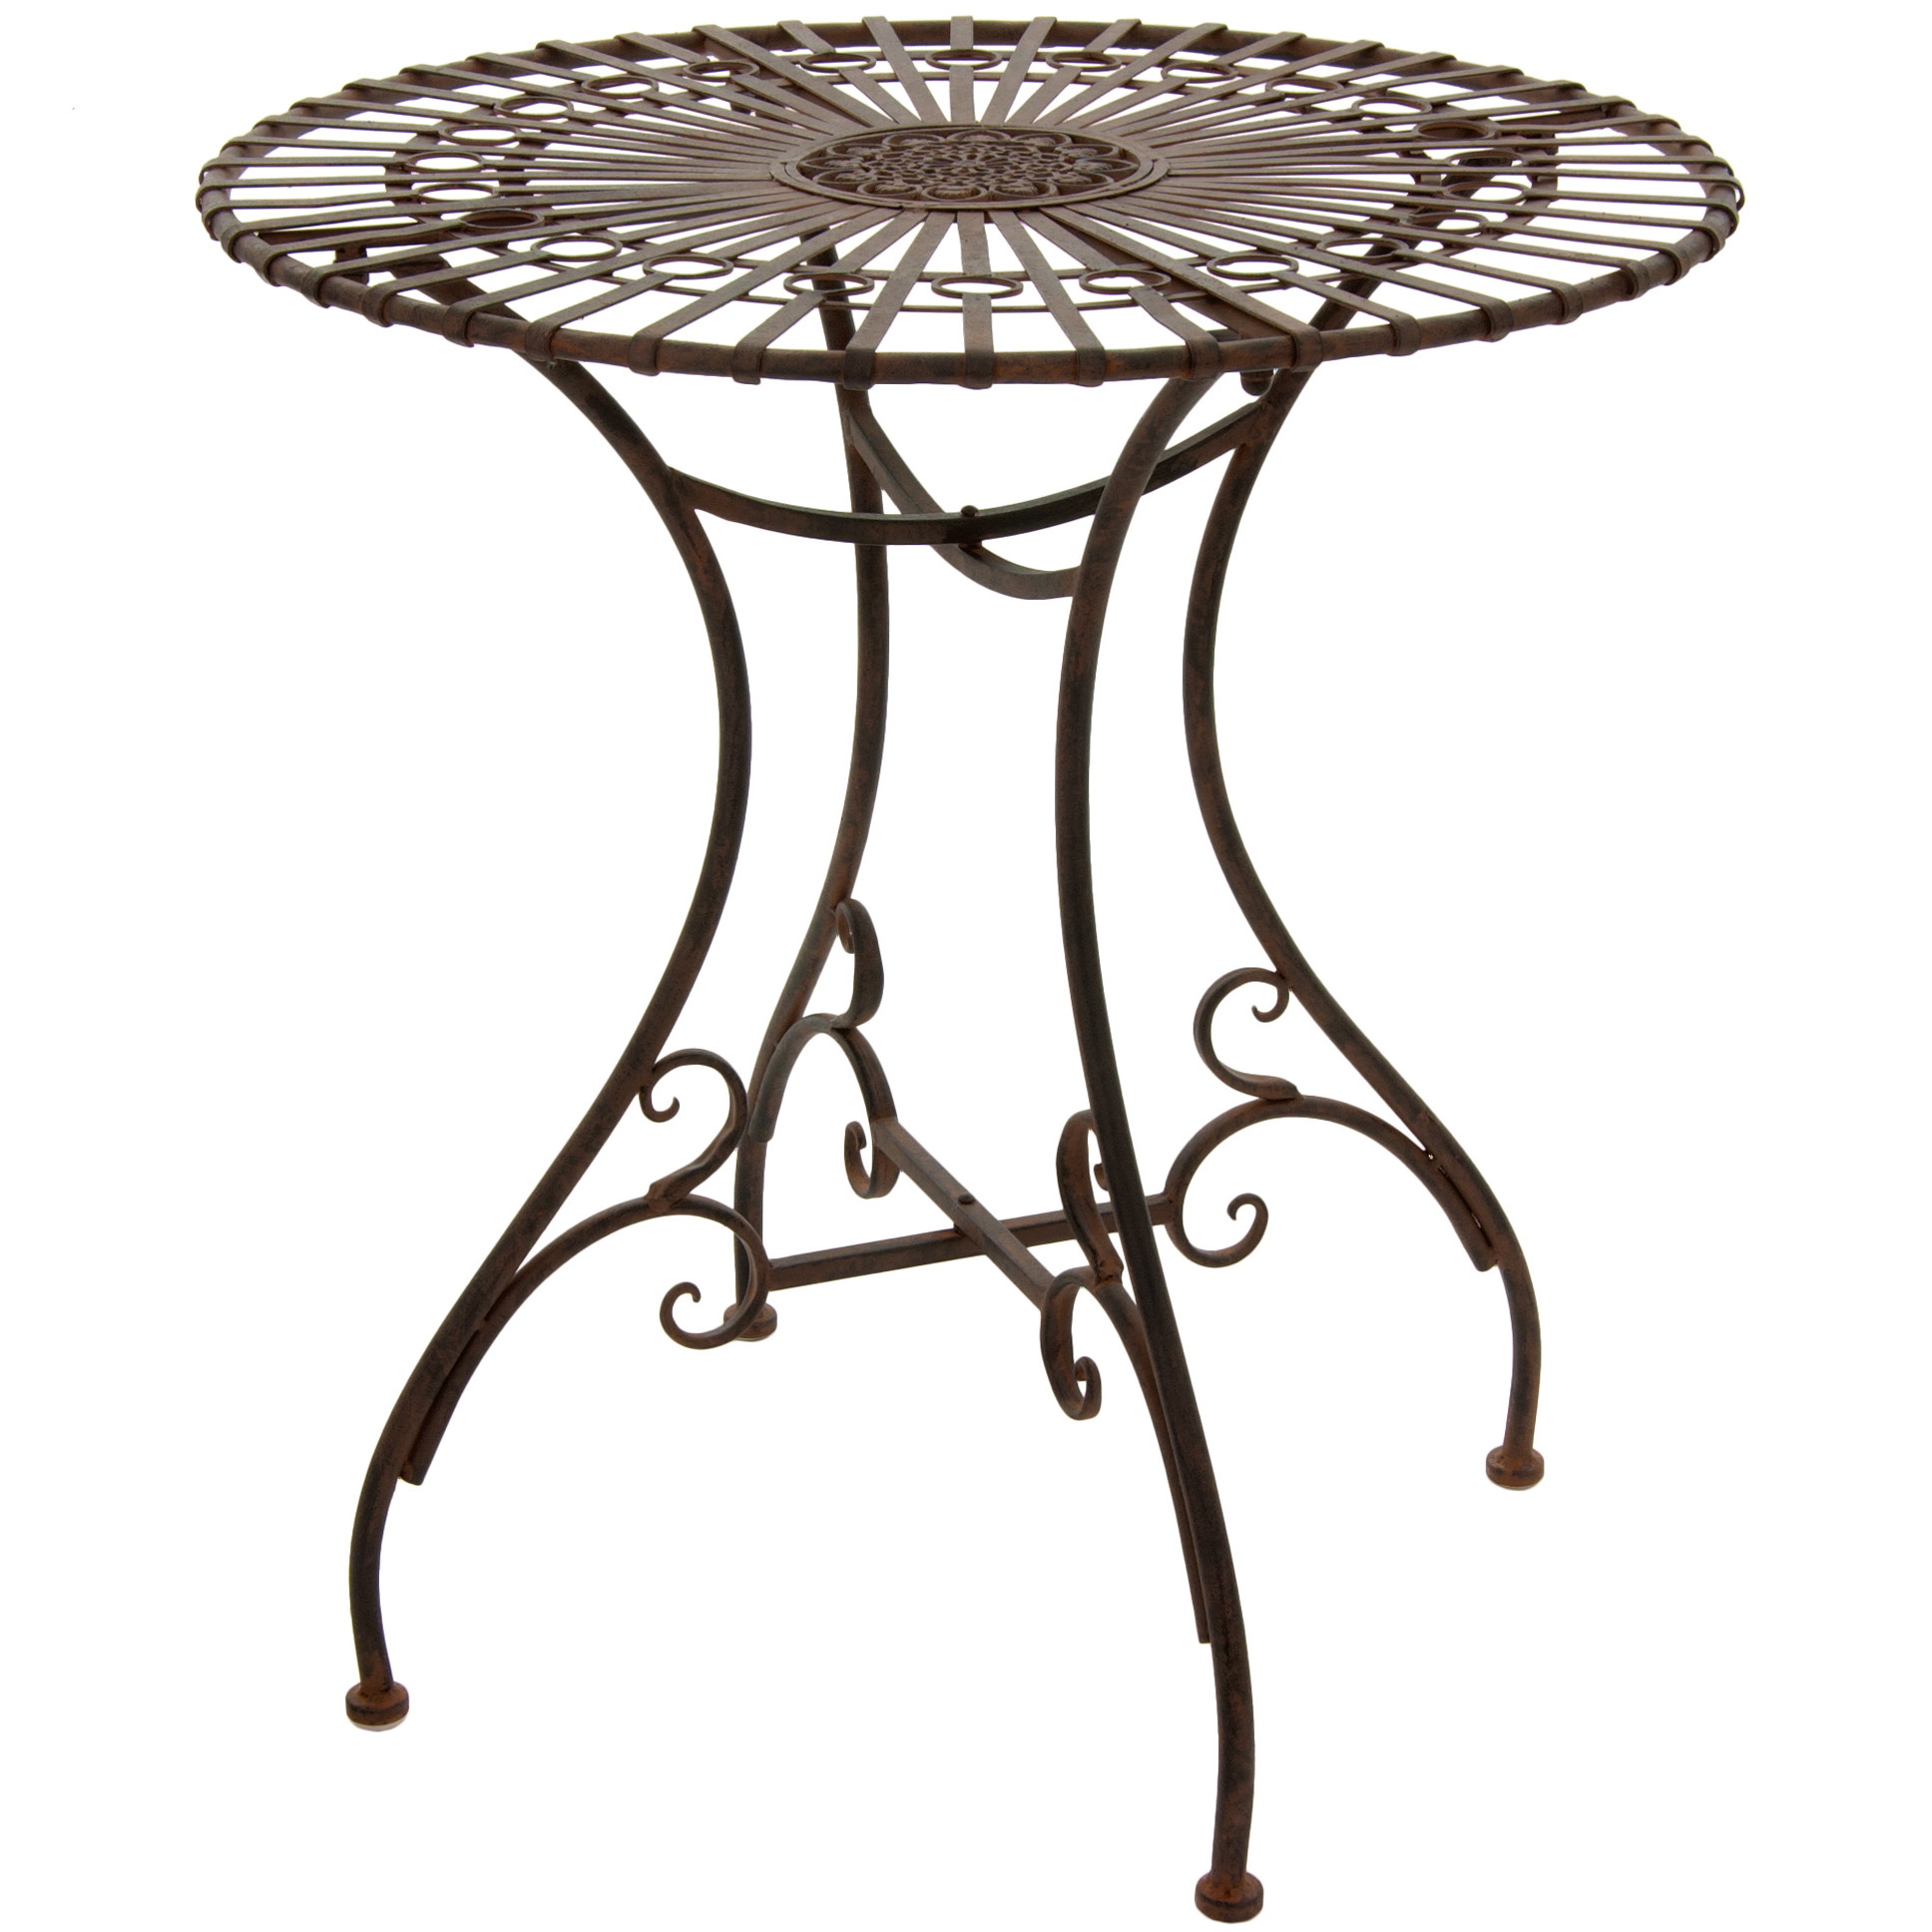 Buy Rustic Garden Table - Rust Patina Online (GF-TABLE1-RST ...